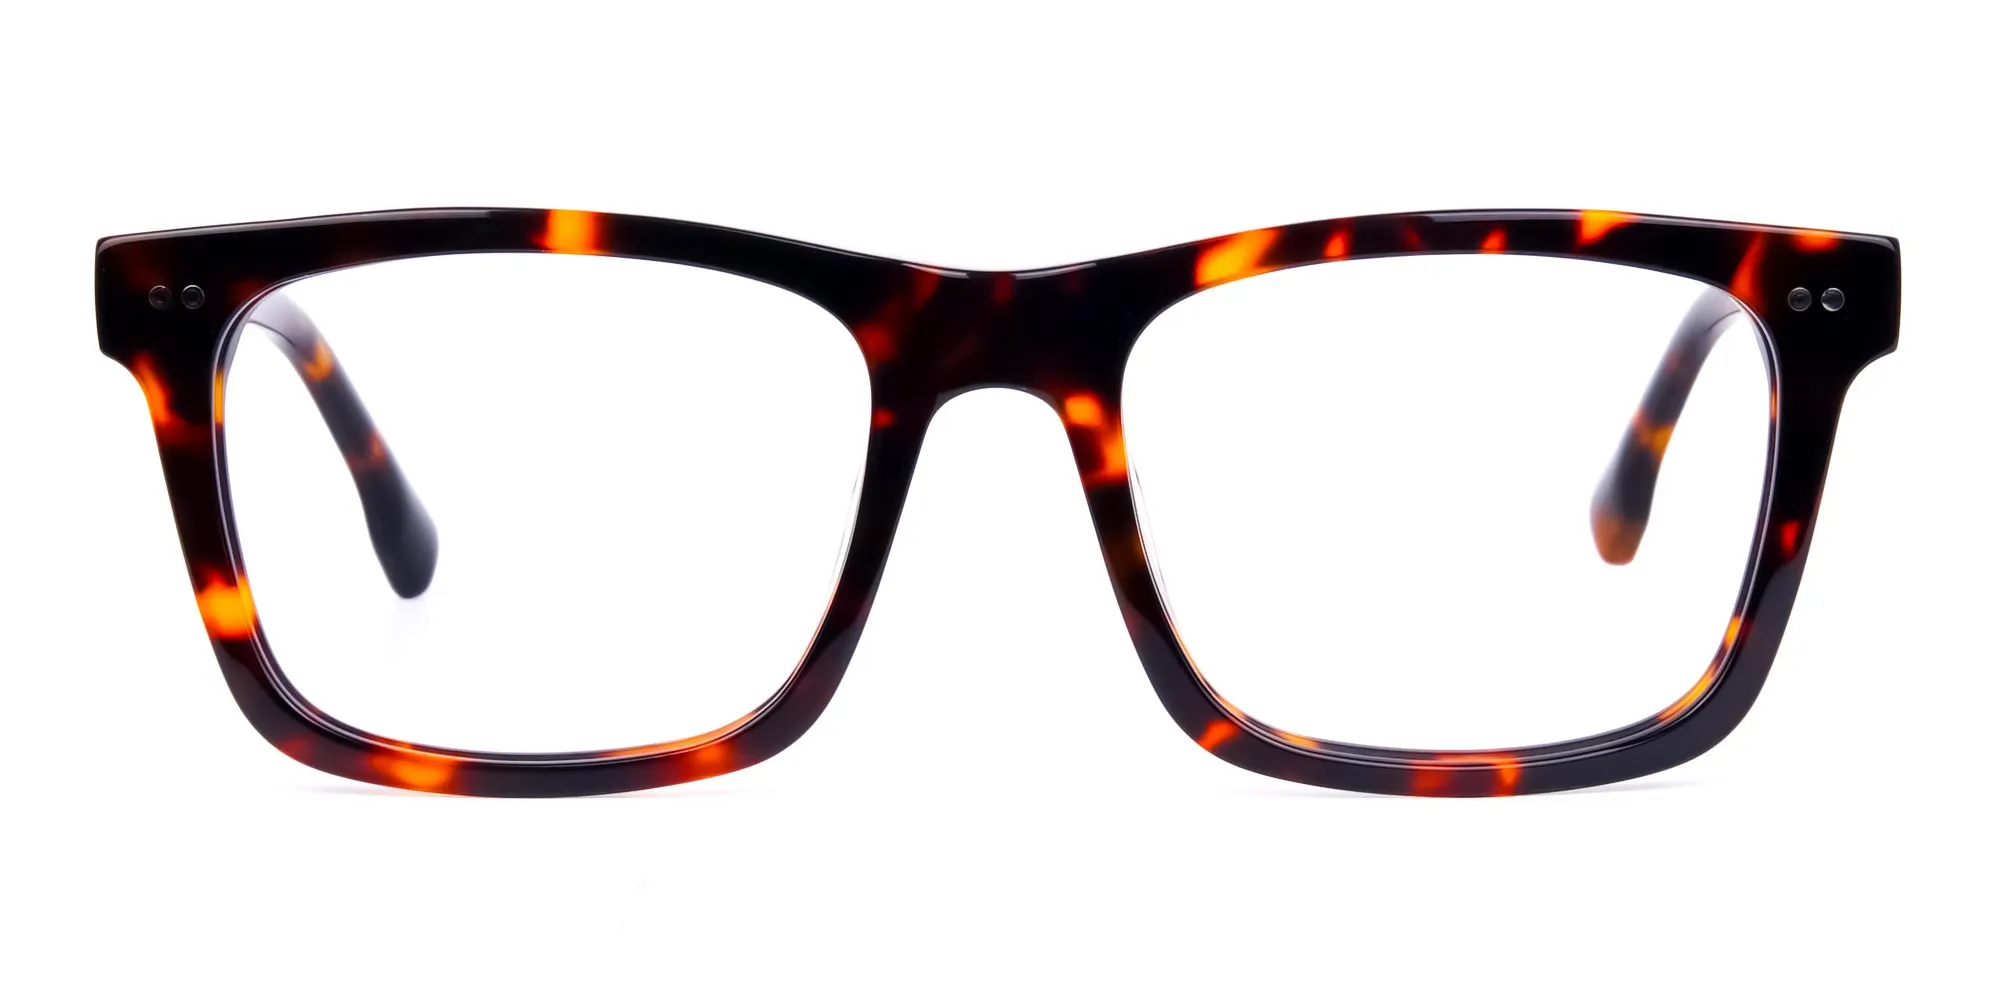 Tortoise and Brown Square Glasses